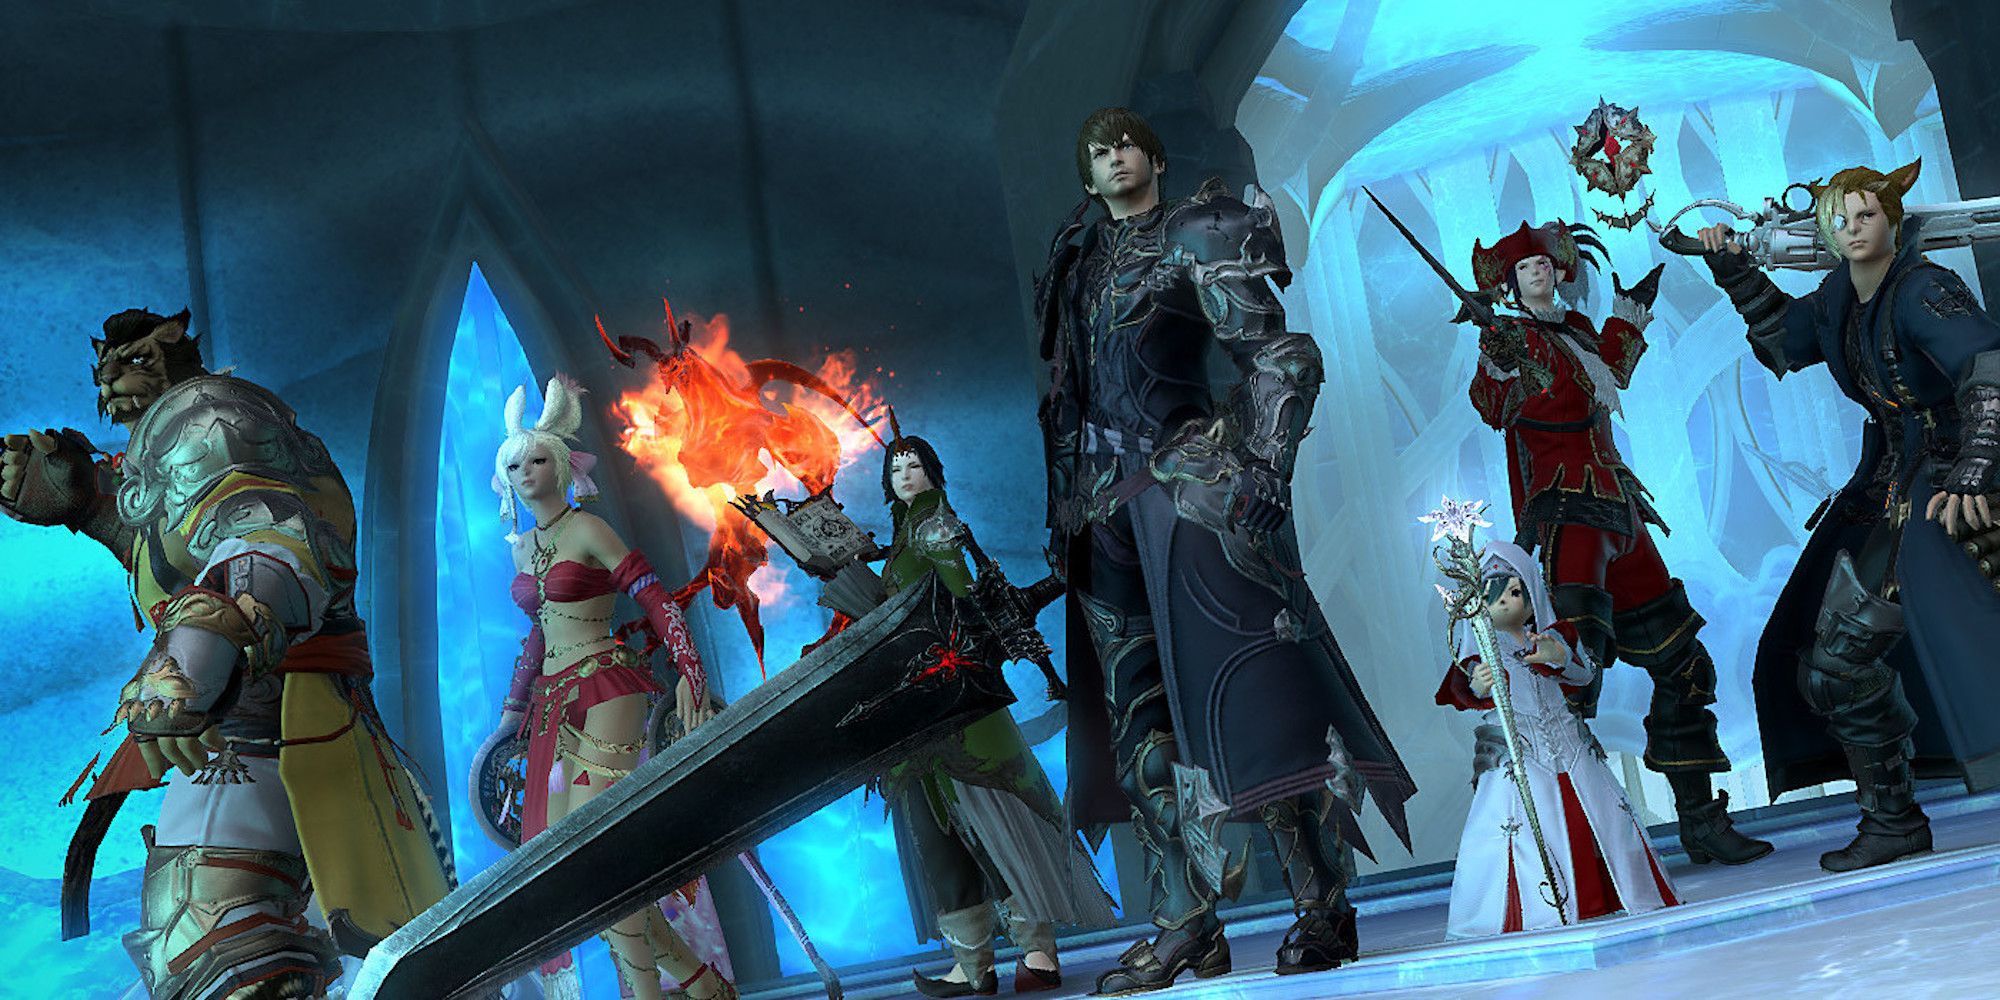 A party in Final Fantasy 14